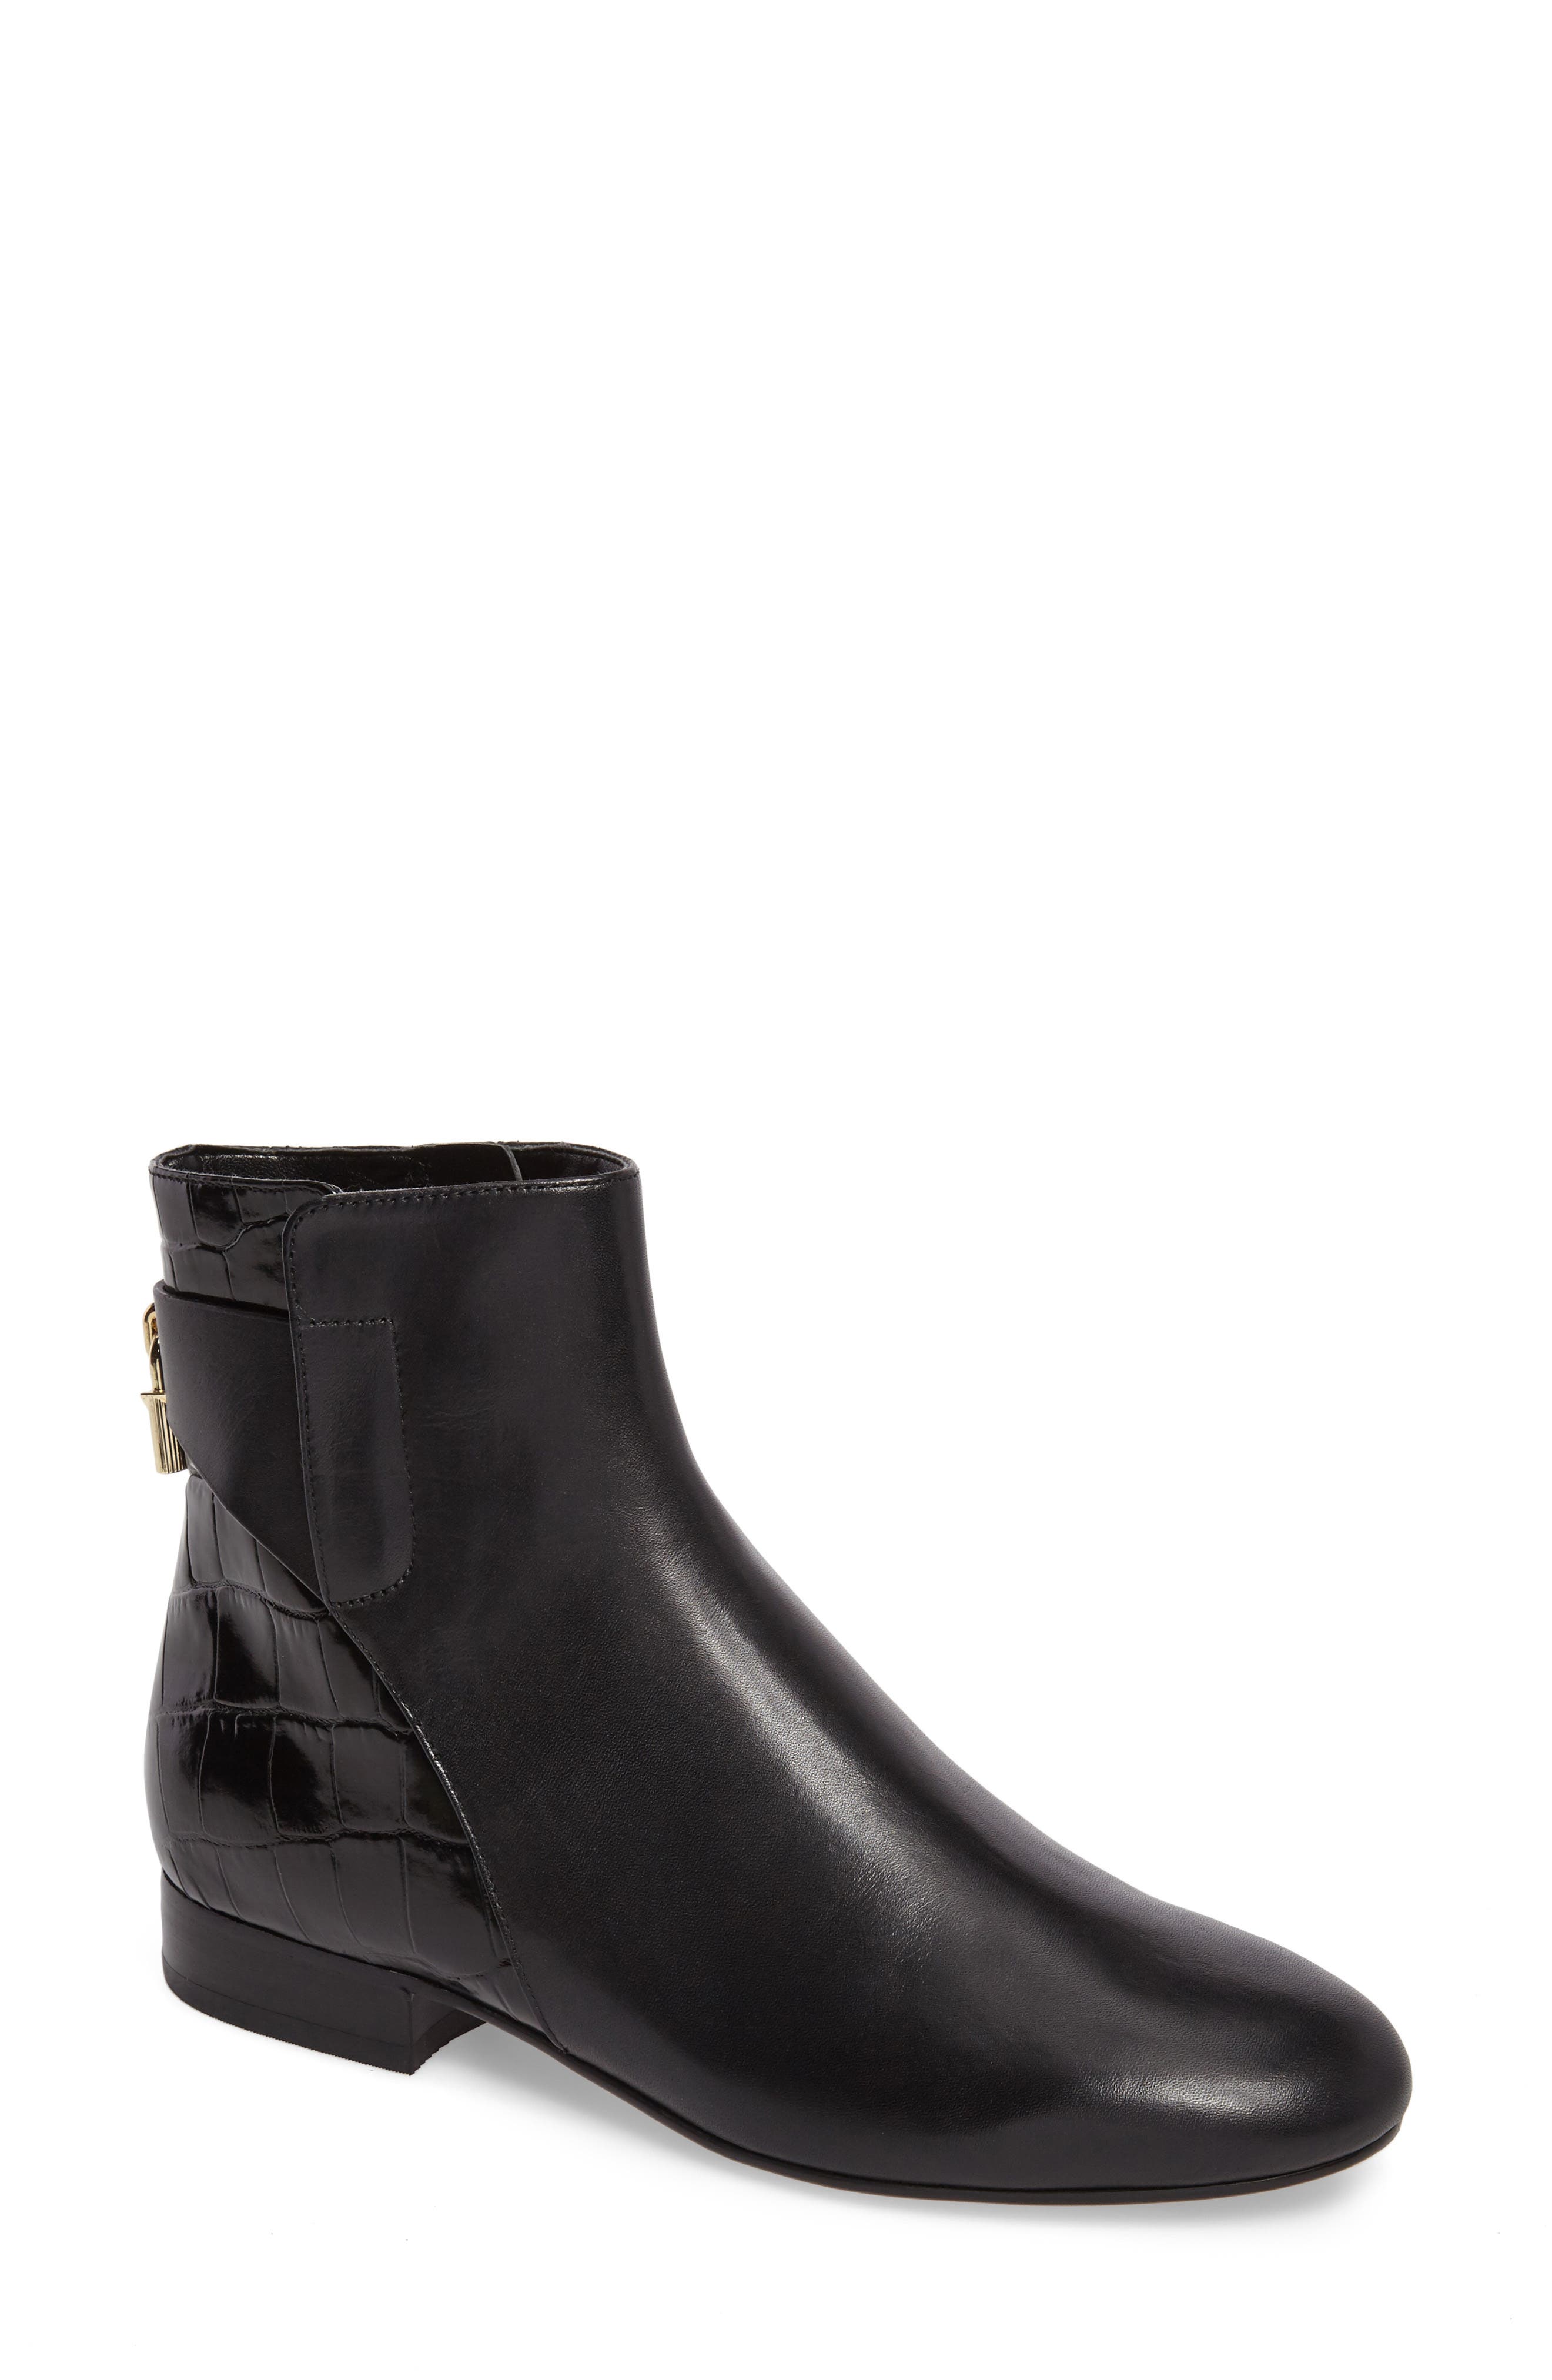 Mira Croc Embossed Leather Flat Boot 